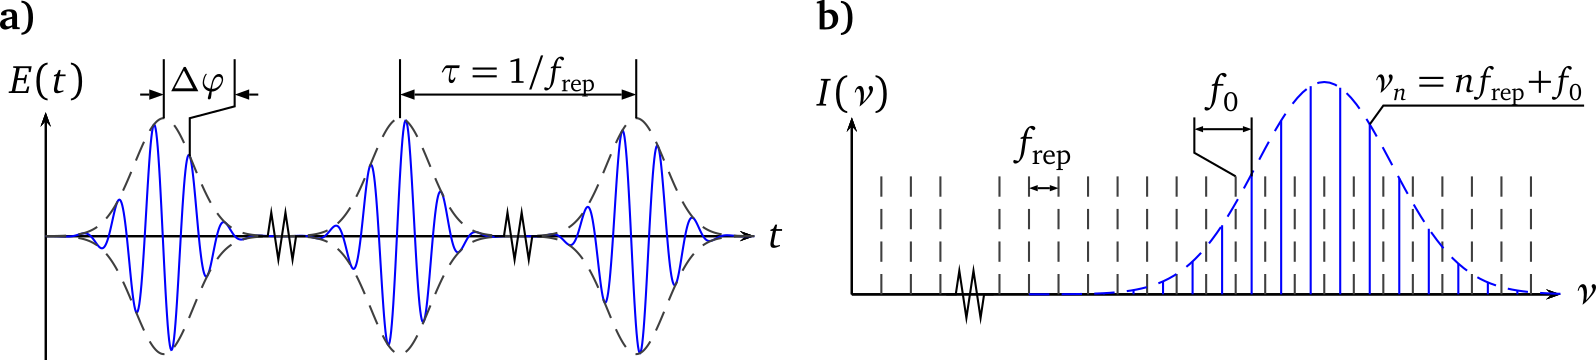 Optical frequency comb in time and frequency domain